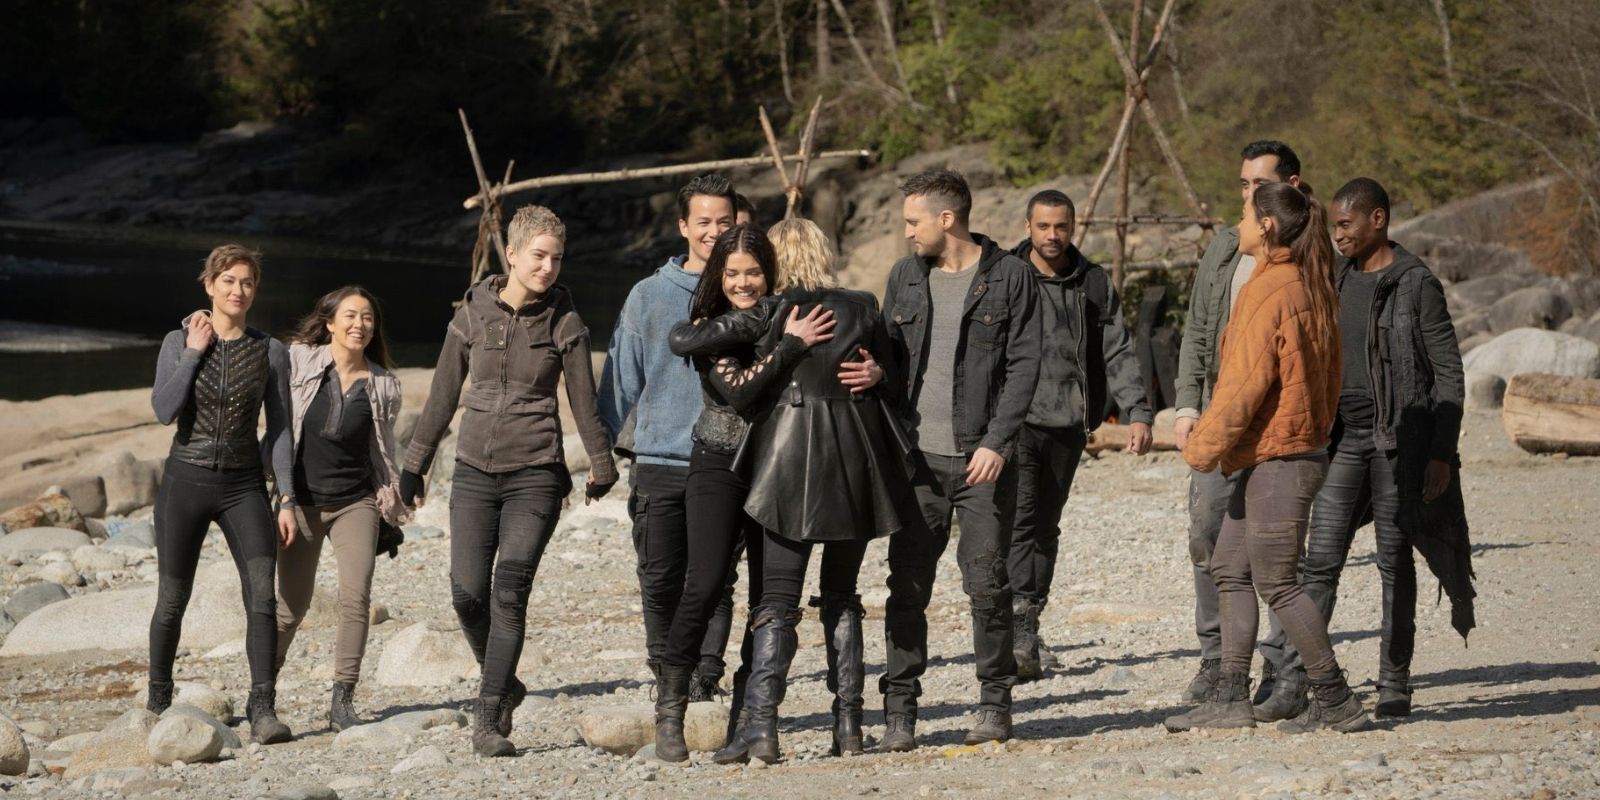 Raven and her friends meet up with Clarke on the beach in The 100 series finale